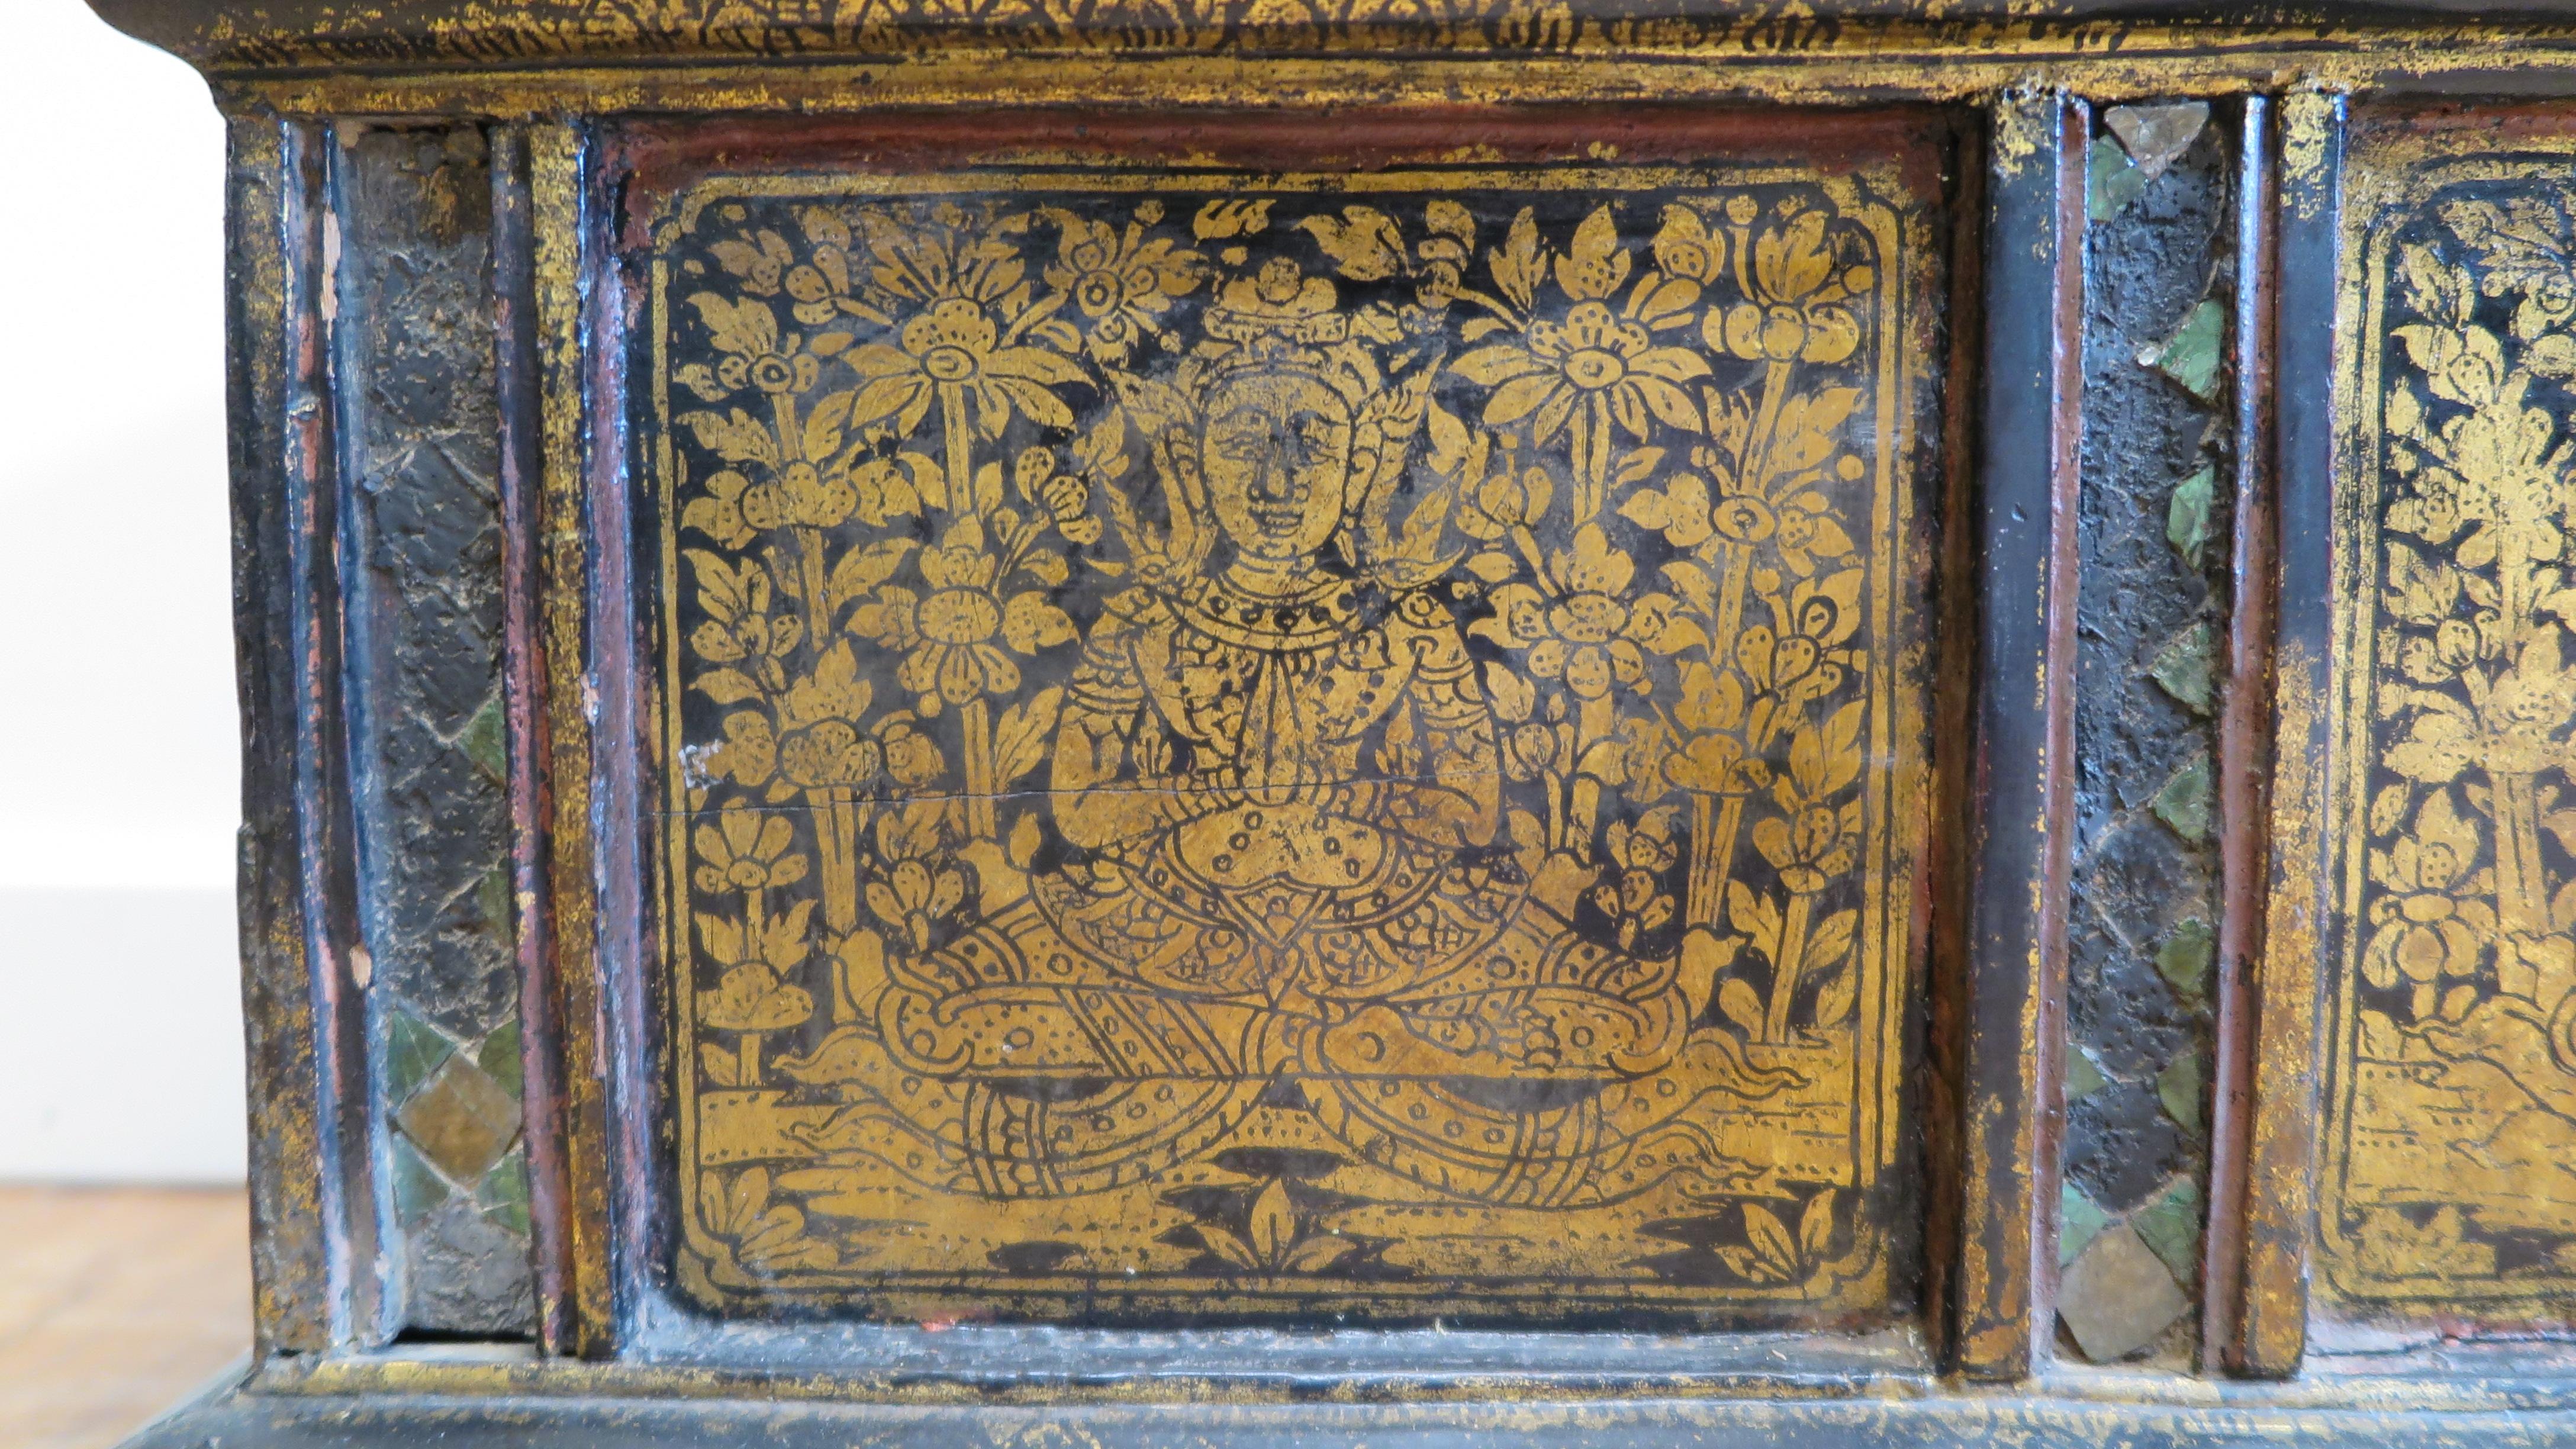 19th century Buddhist prayer box. A Thai Buddhist manuscript box of the 19th century or earlier. This type of box was used to to store Buddhist texts, known as Buddhavacana, Sutras, and Shastras, and or 